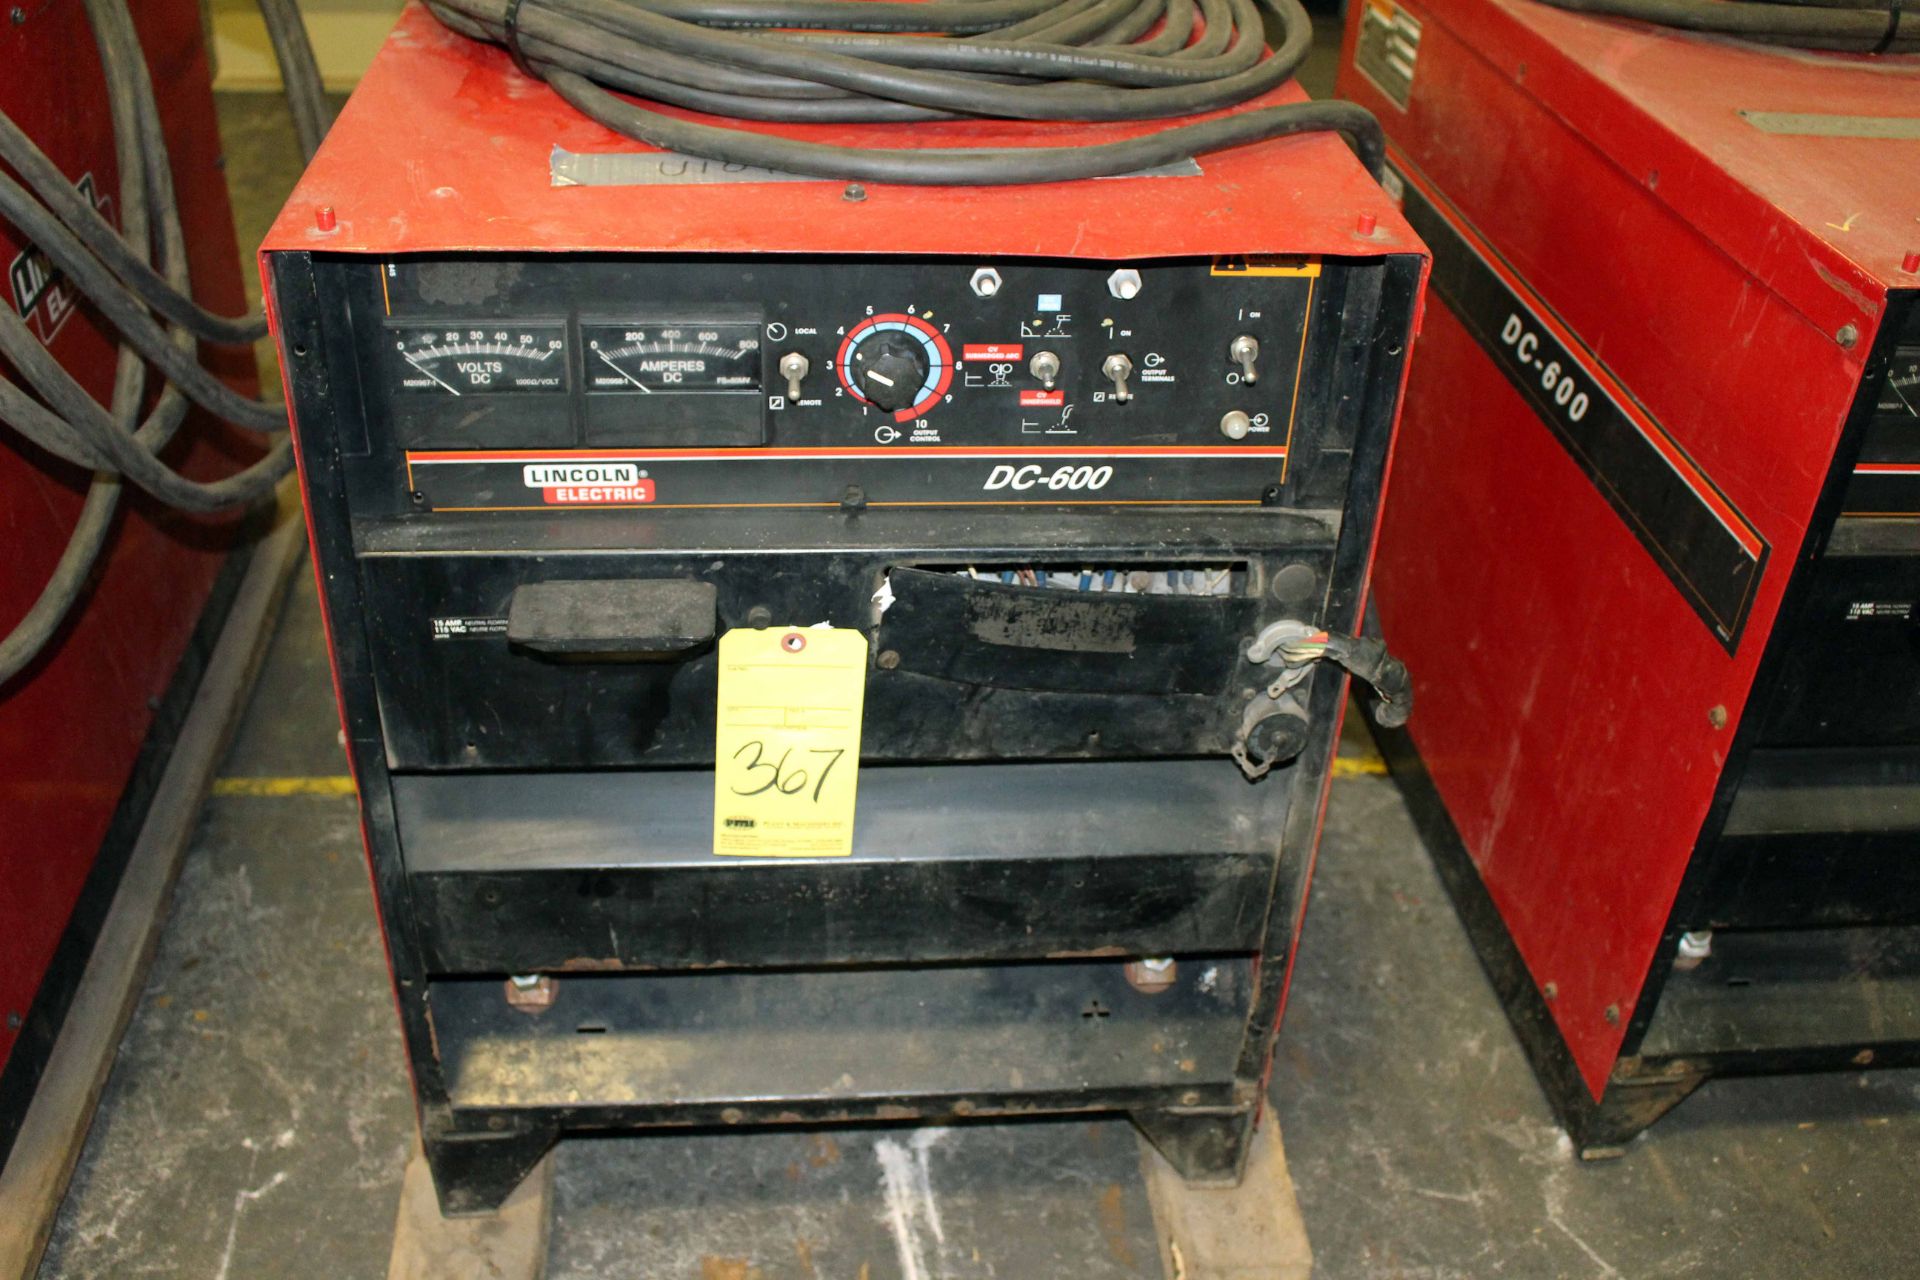 WELDING MACHINE, LINCOLN MDL. IDEAL ARC DC-600, 600 amps., 40 v. @100% duty cycle, S/N U1070505206